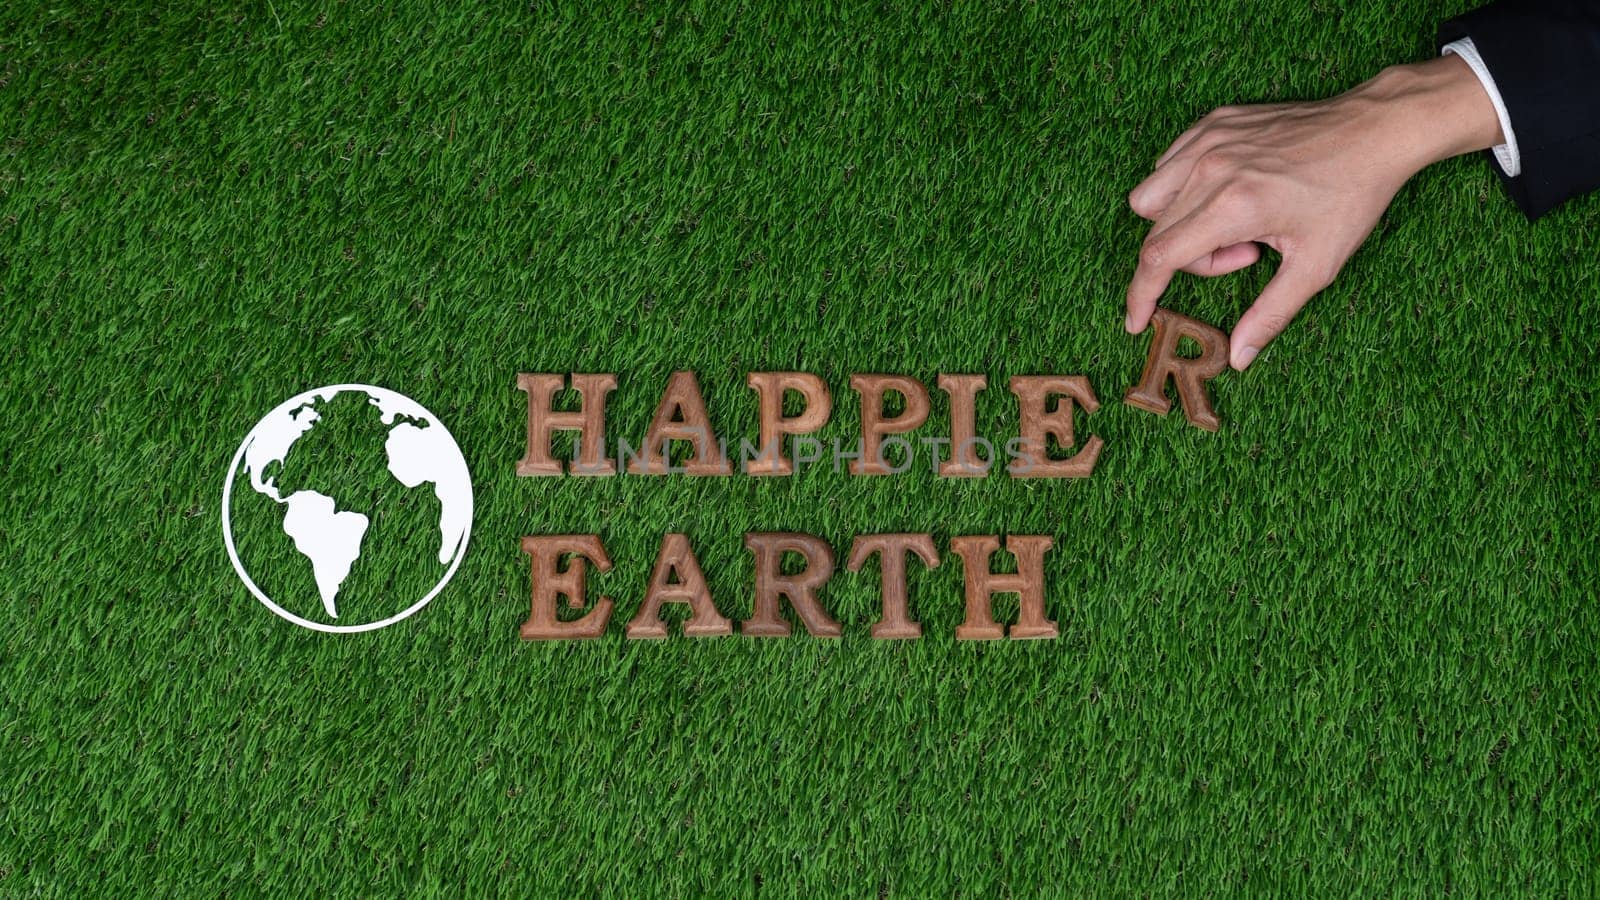 Eco awareness campaign for Earth day concept showcase message arranged in Save Earth on biophilic green background. Environmental social governance concept idea for sustainable and greener future.Gyre